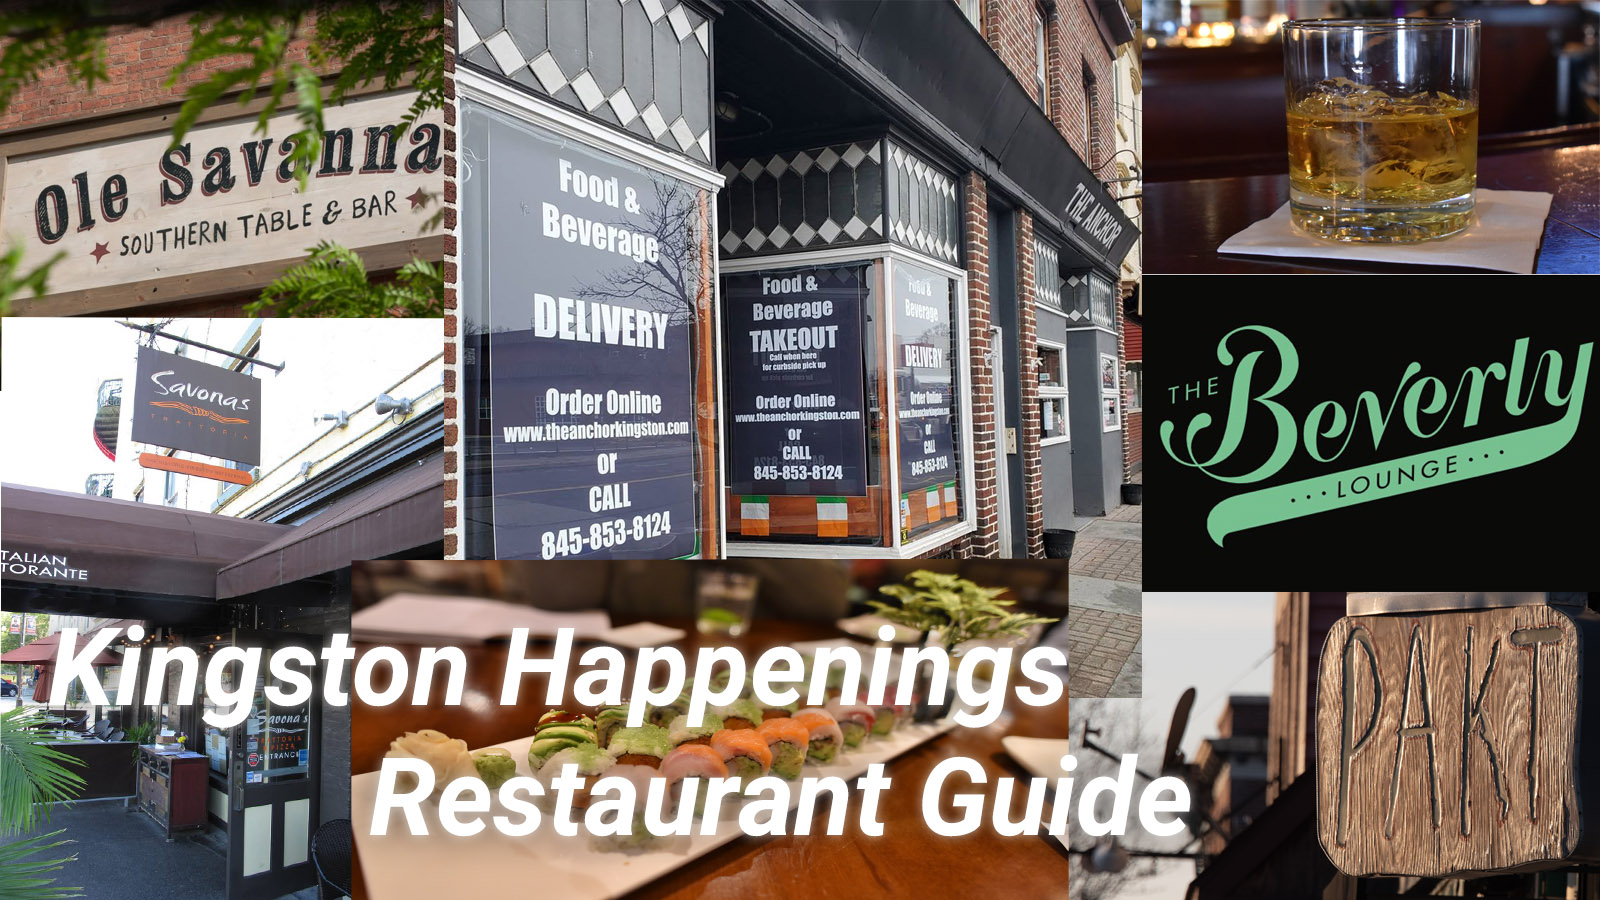 Kingston Happenings Restaurant Guide: Find Local Takeout and Delivery